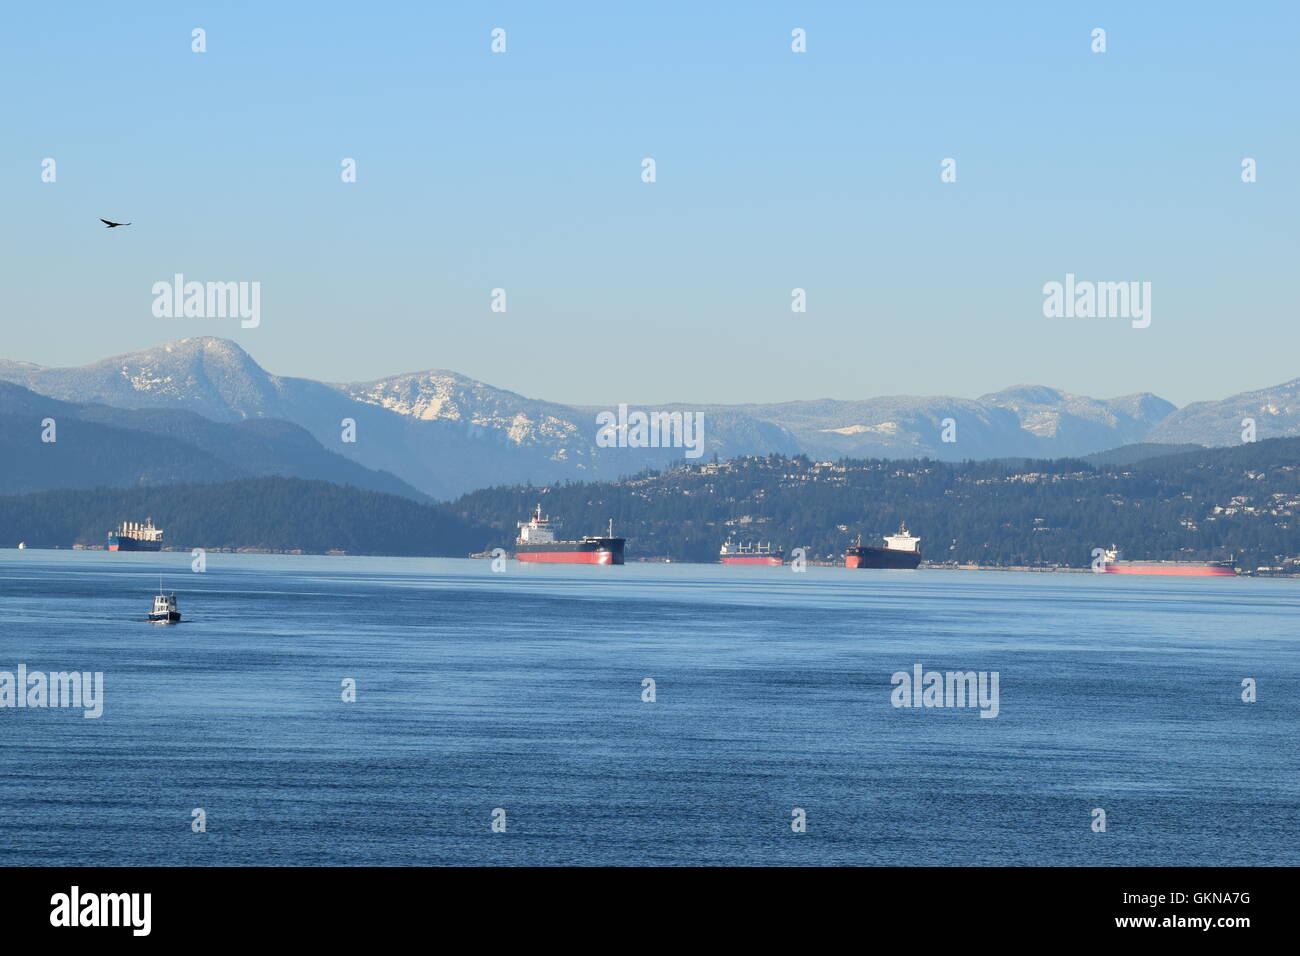 Tankers in English Bay, Vancouver - Stanley park Stock Photo